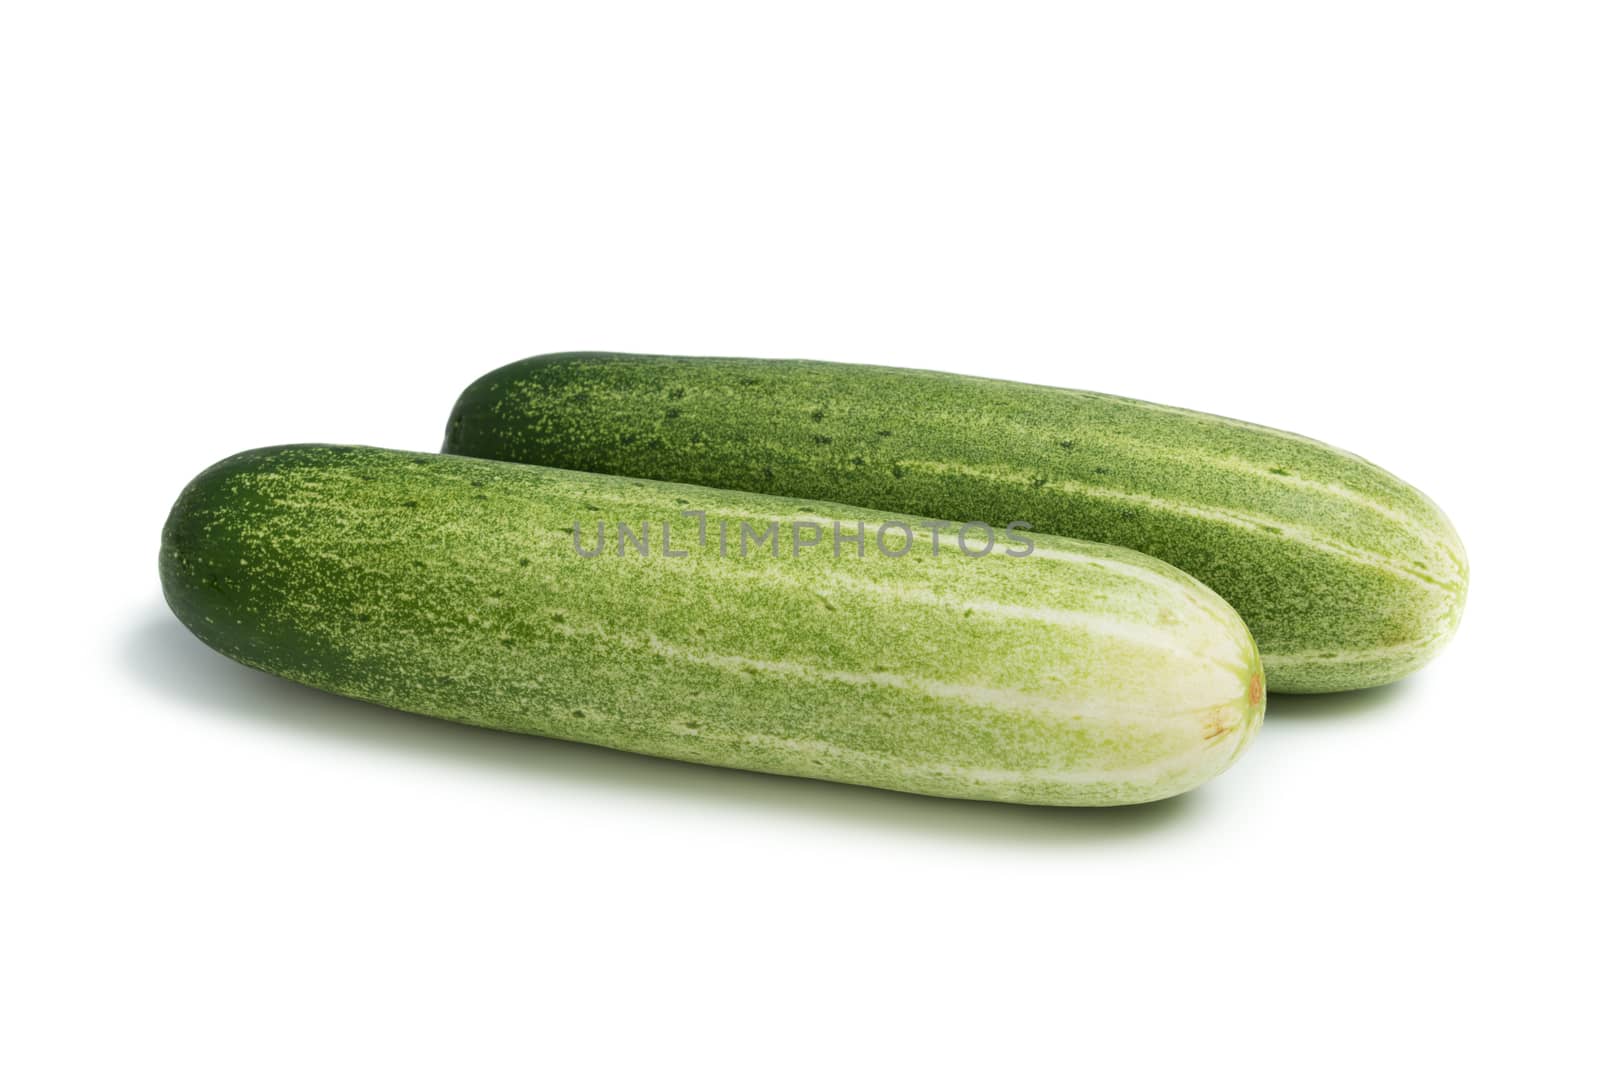 Two green cucumber isolated on white background with clipping path